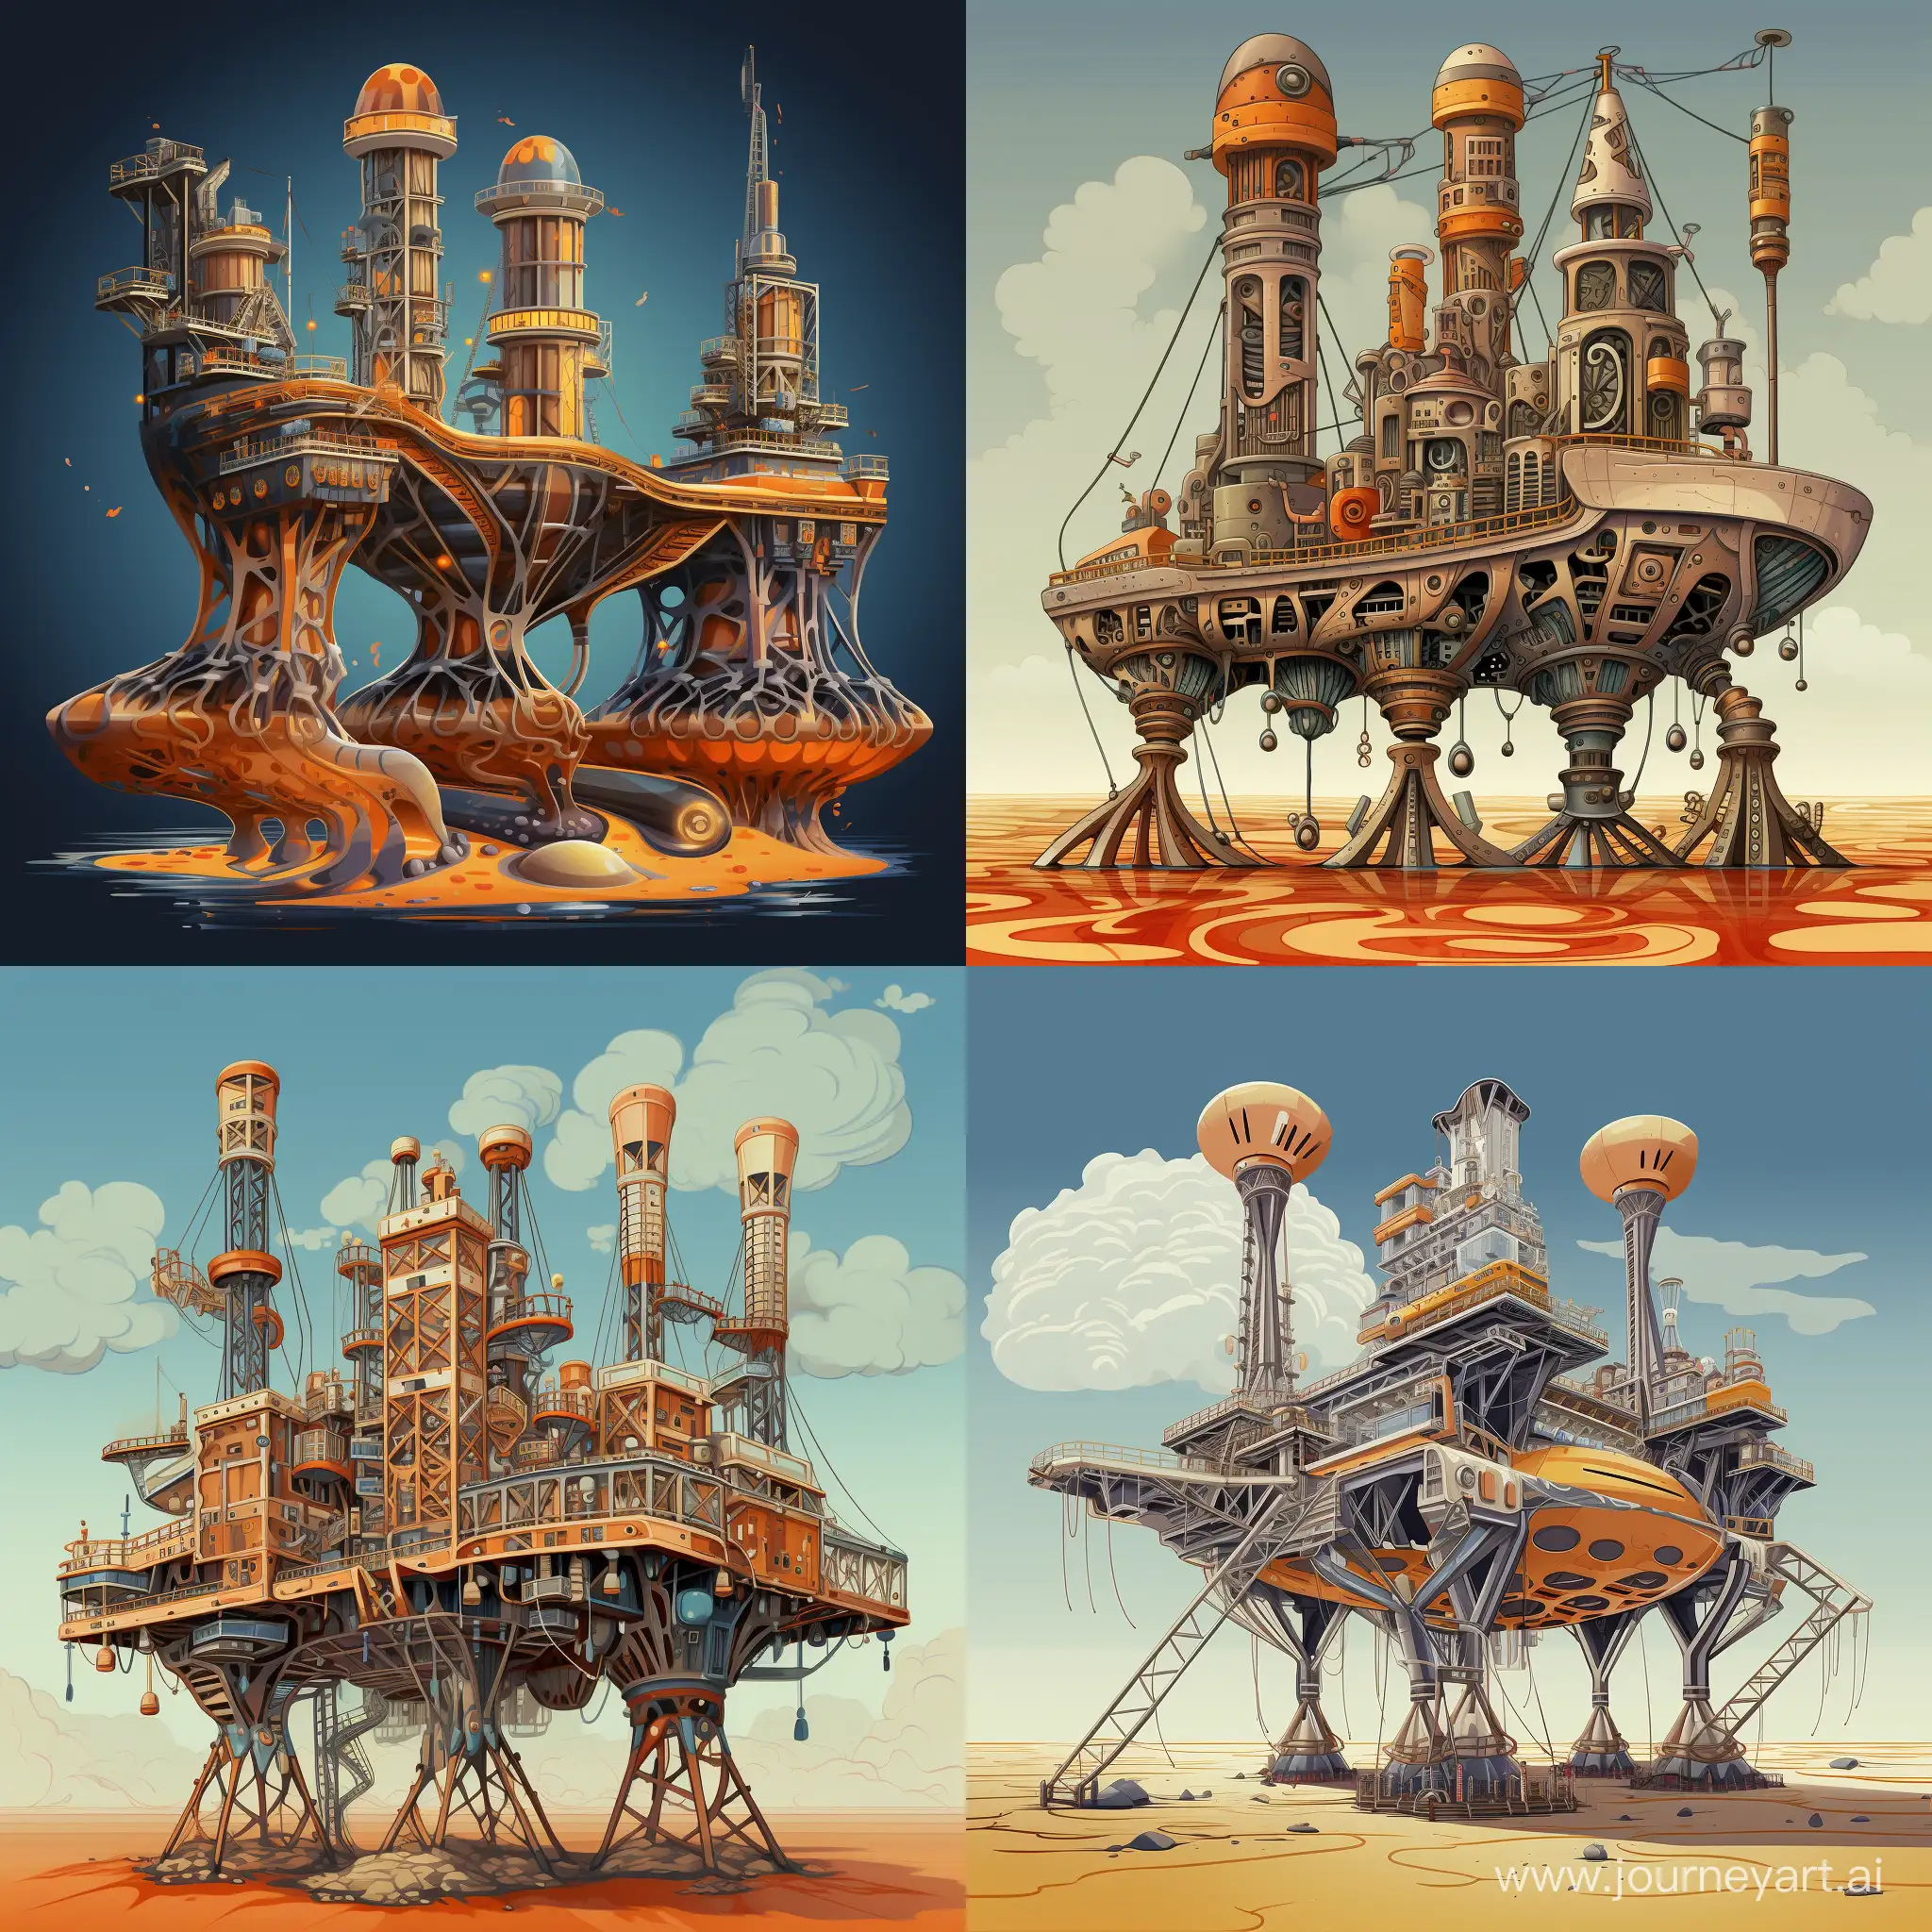 DuckFooted-Oil-Extraction-Platform-Stylized-Graphical-Representation